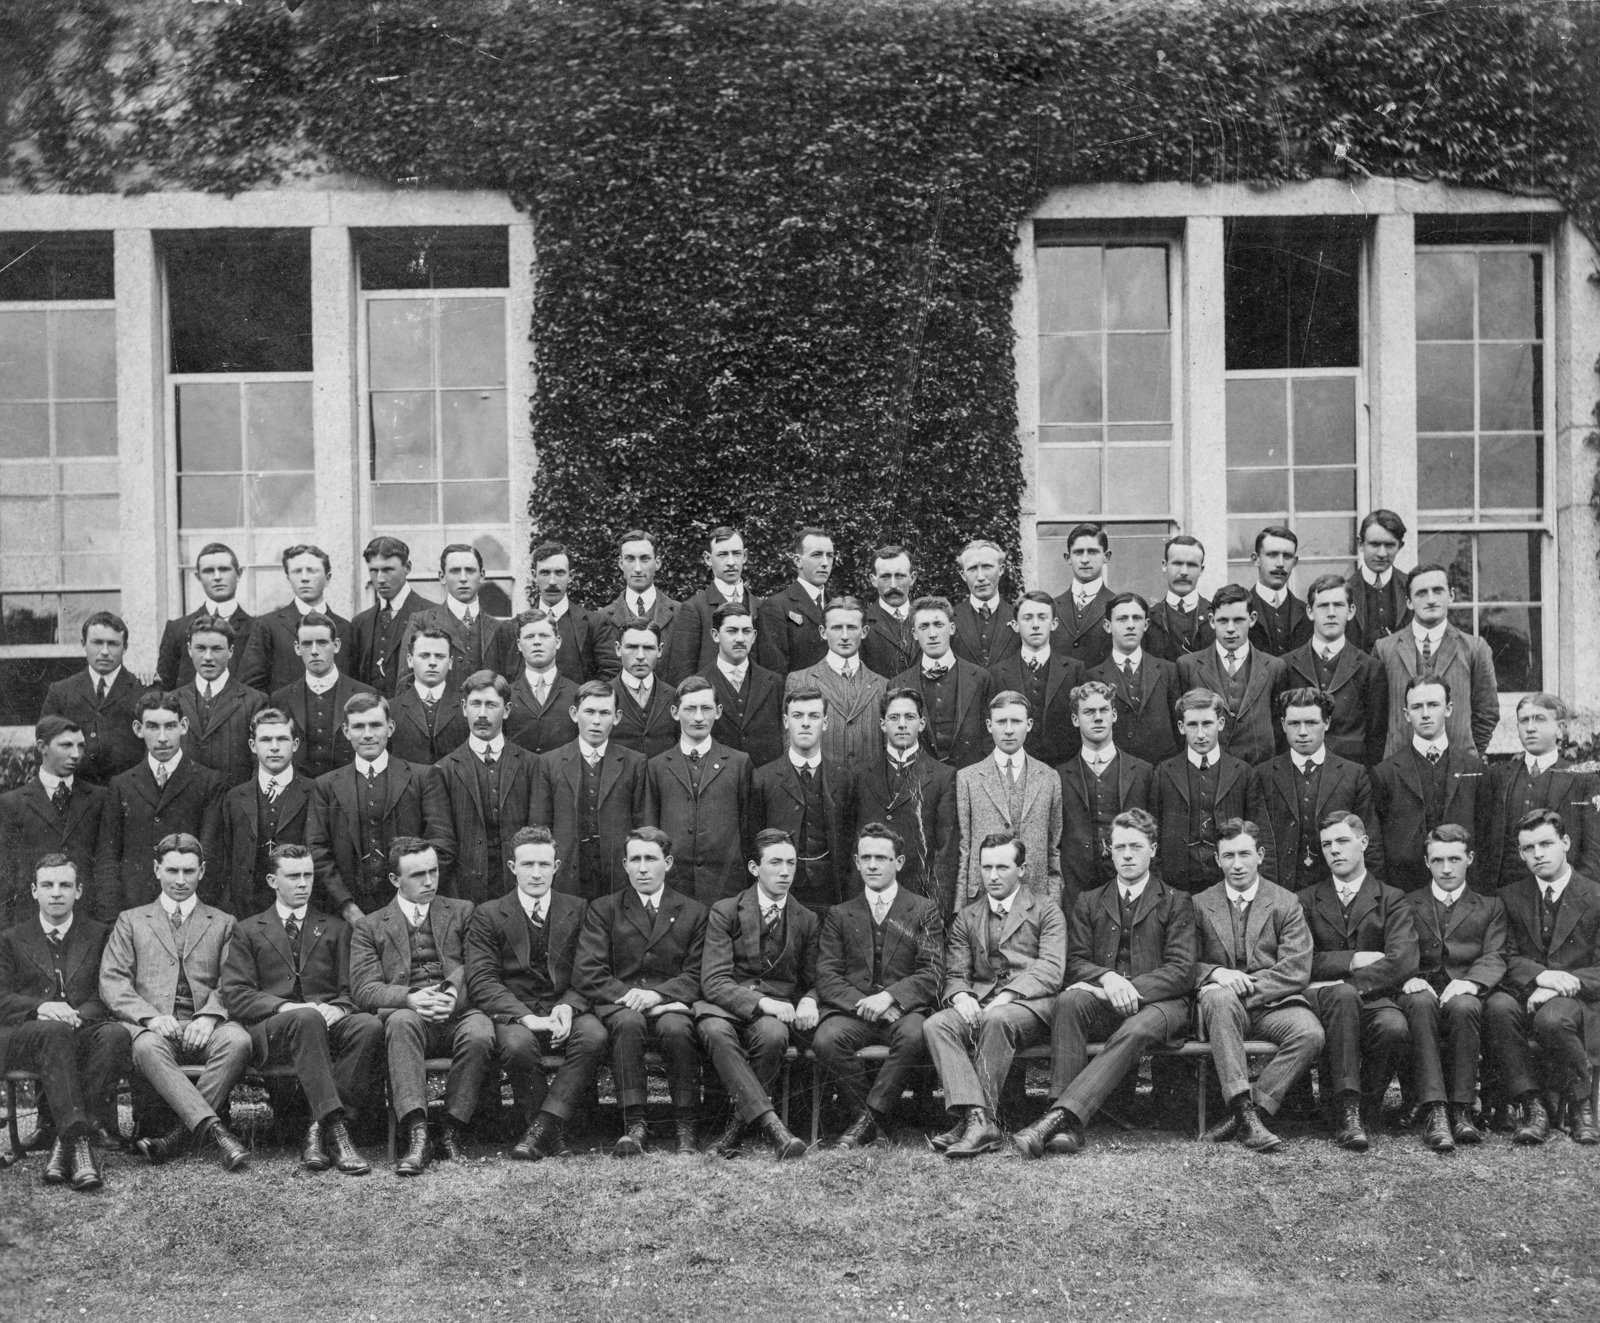 Con O'Donovan at College of Science, Dublin, probably 1924. Con O’Donovan is in the second row from the bottom, fourth from the left.